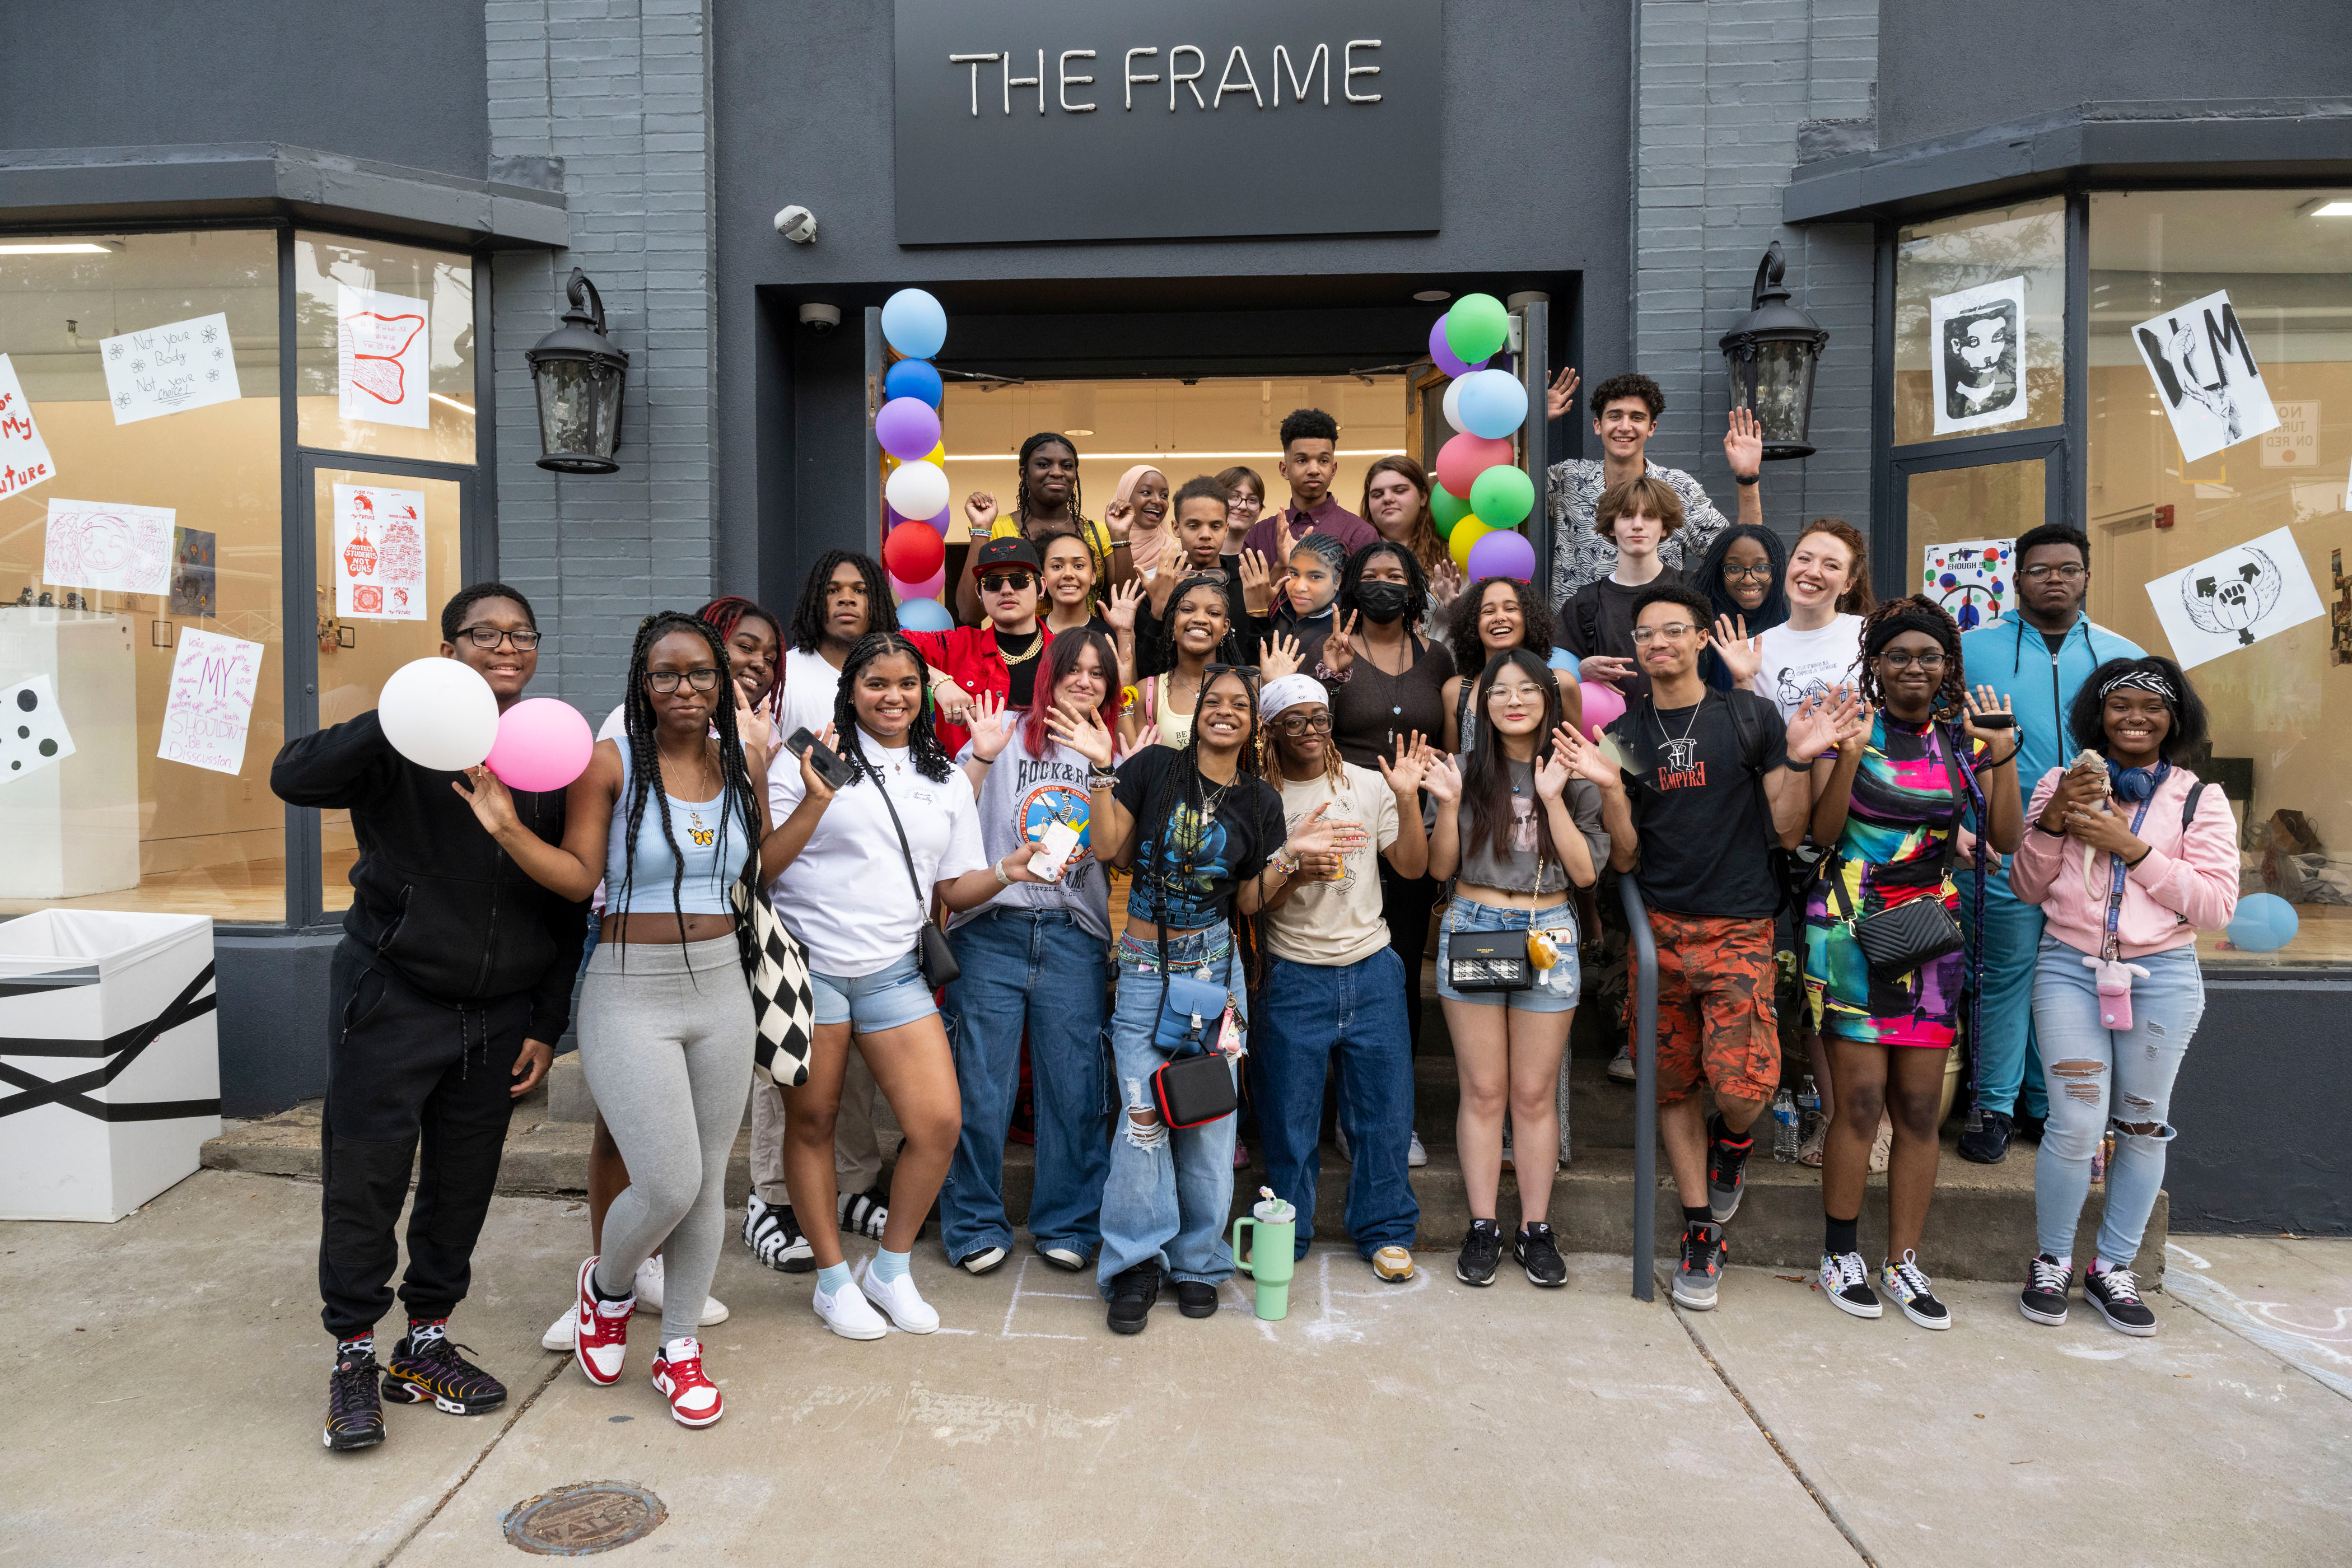 LEAP students and their teacher posing together outside of The Frame Gallery during their Showcase celebration. There are balloons around the door and artwork in the windows.